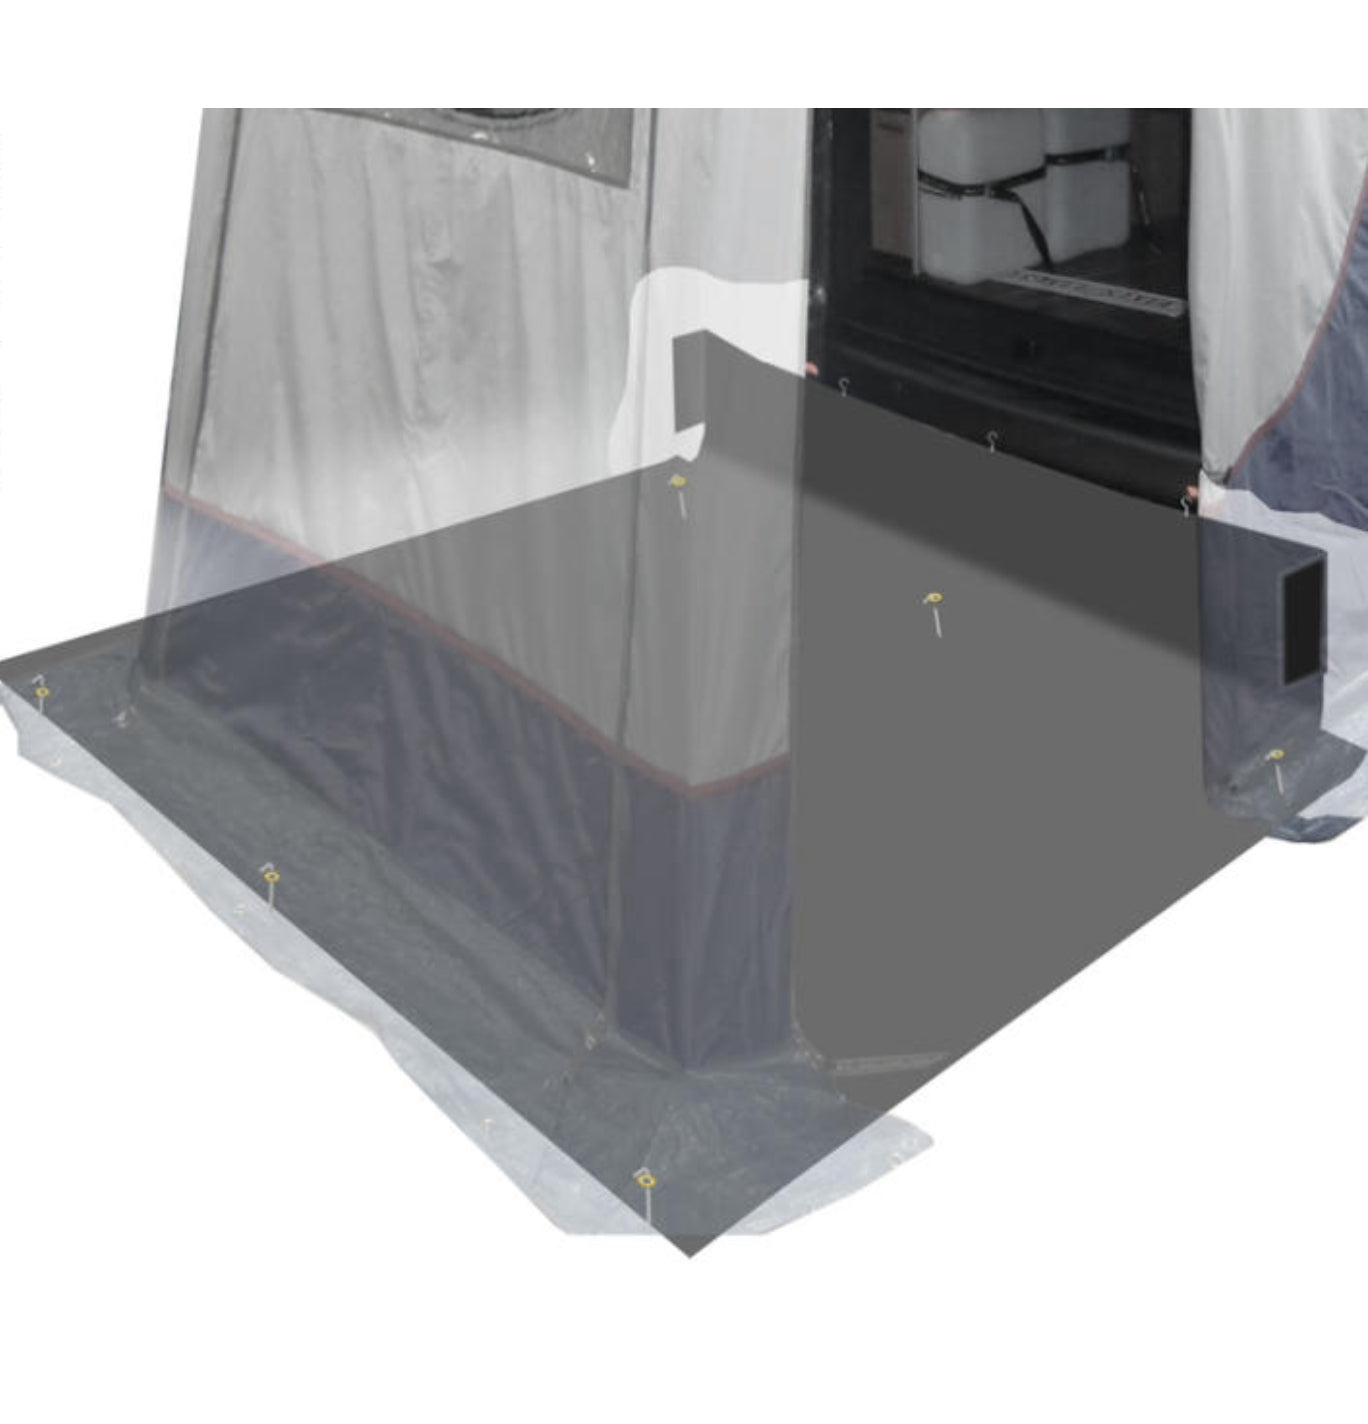 Reimo Trapez Tailgate Tent Ground Sheet Image